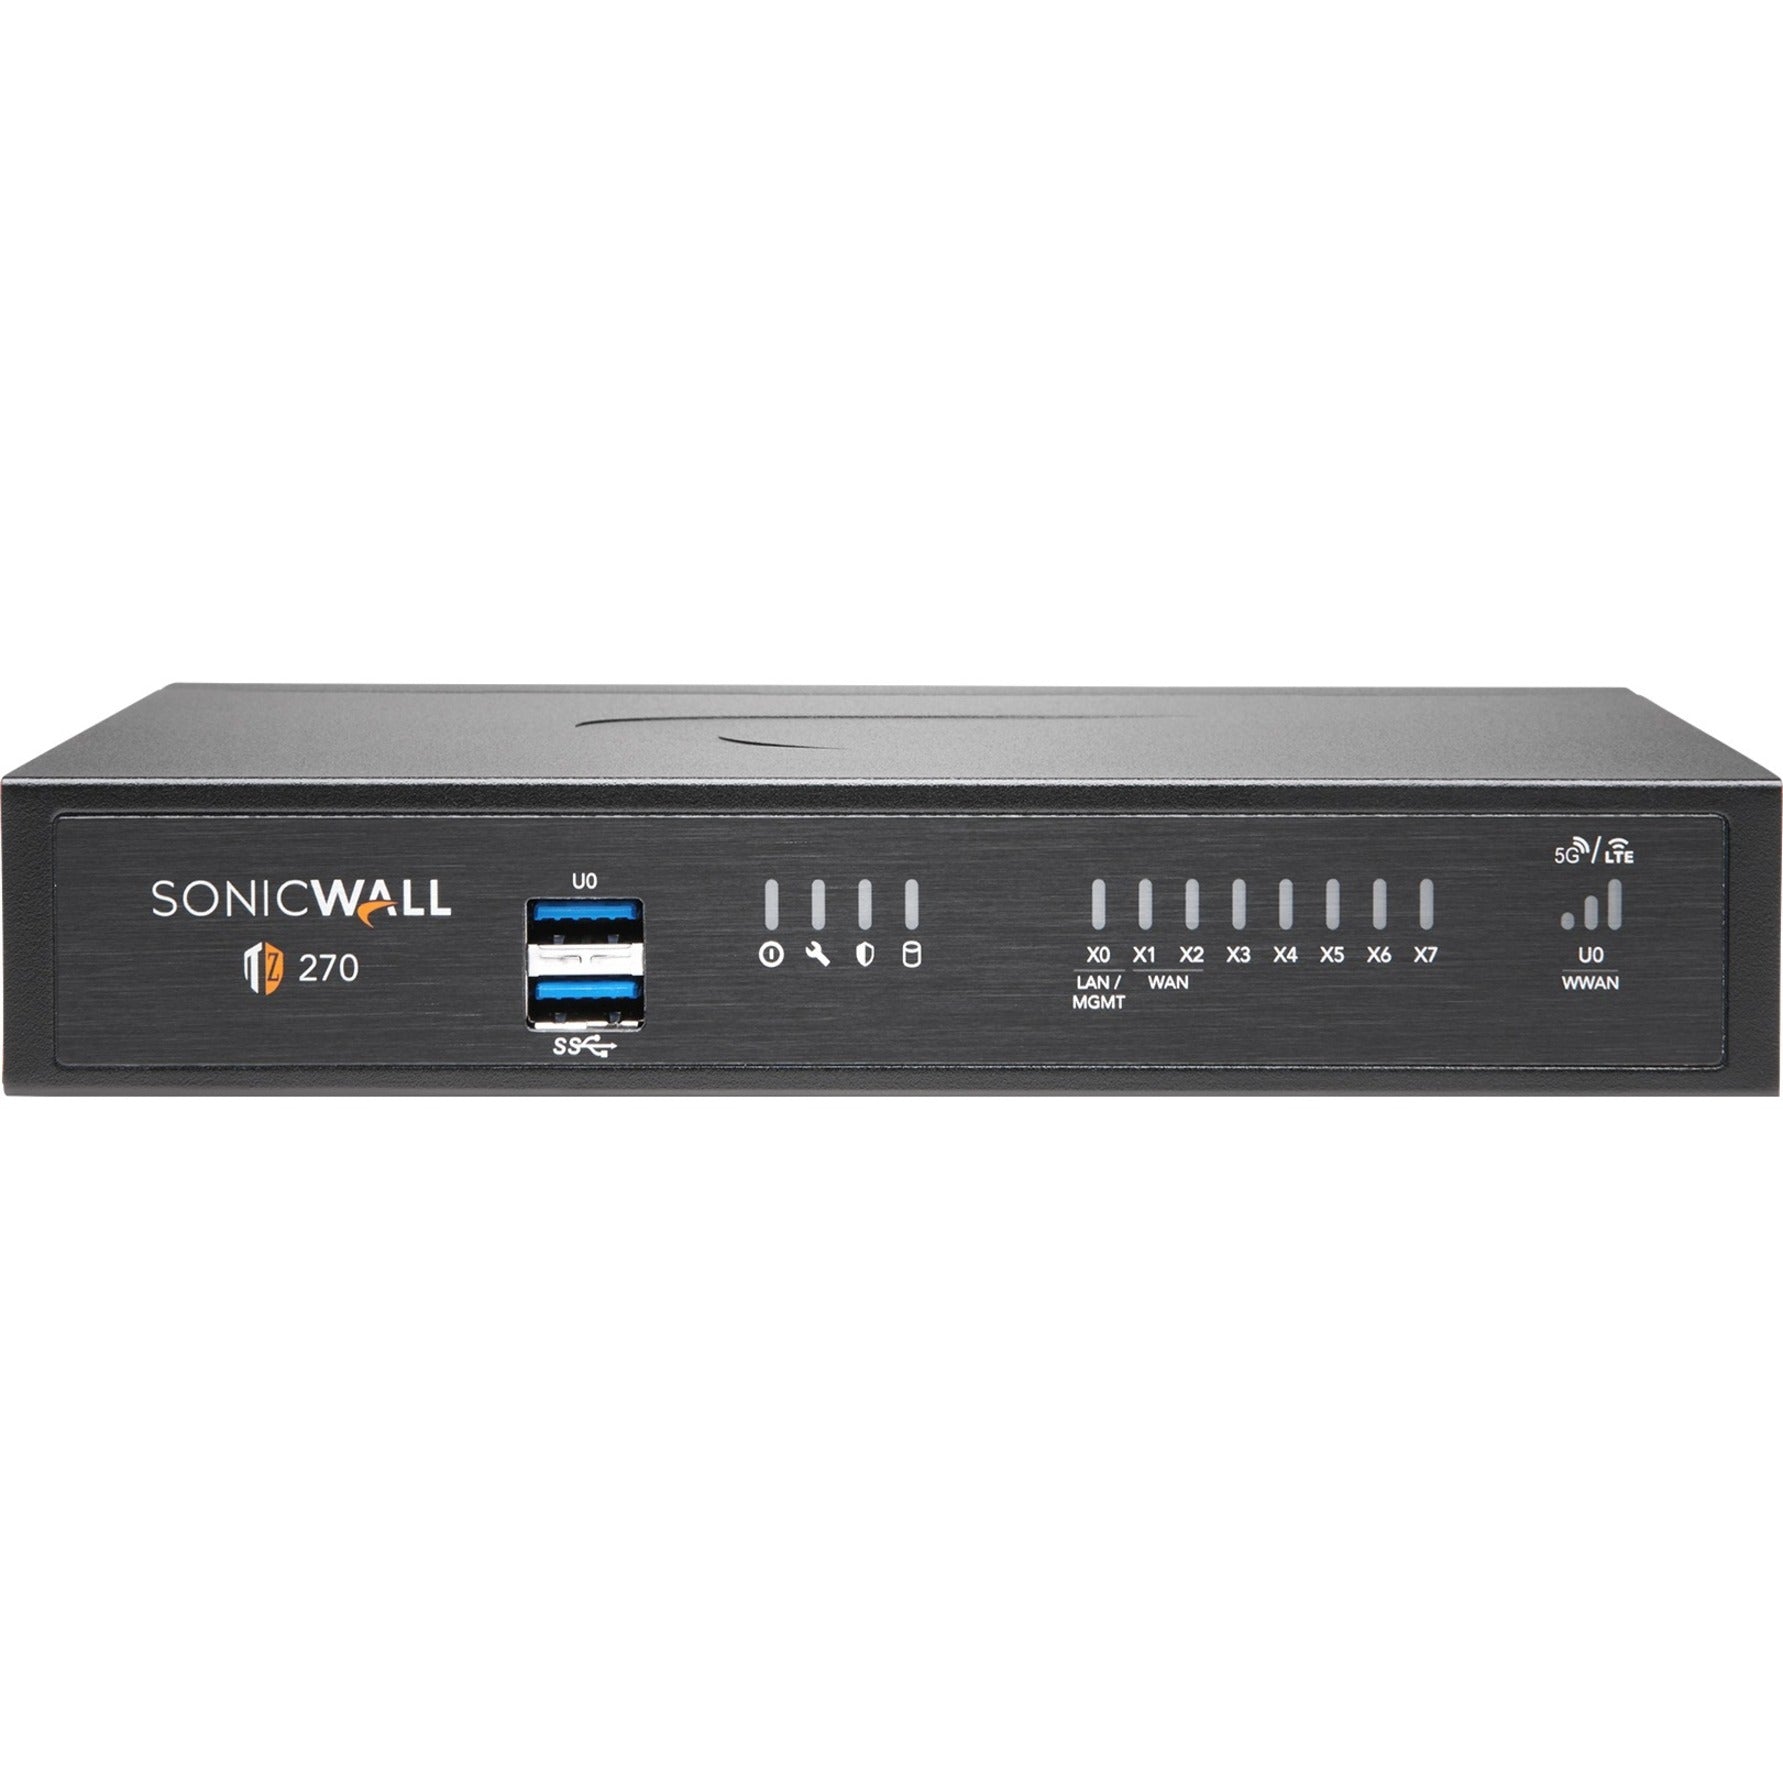 SonicWall 02-SSC-6841 TZ270 Network Security/Firewall Appliance, 8 Ports, TotalSecure Essential Edition, 1 Year Warranty